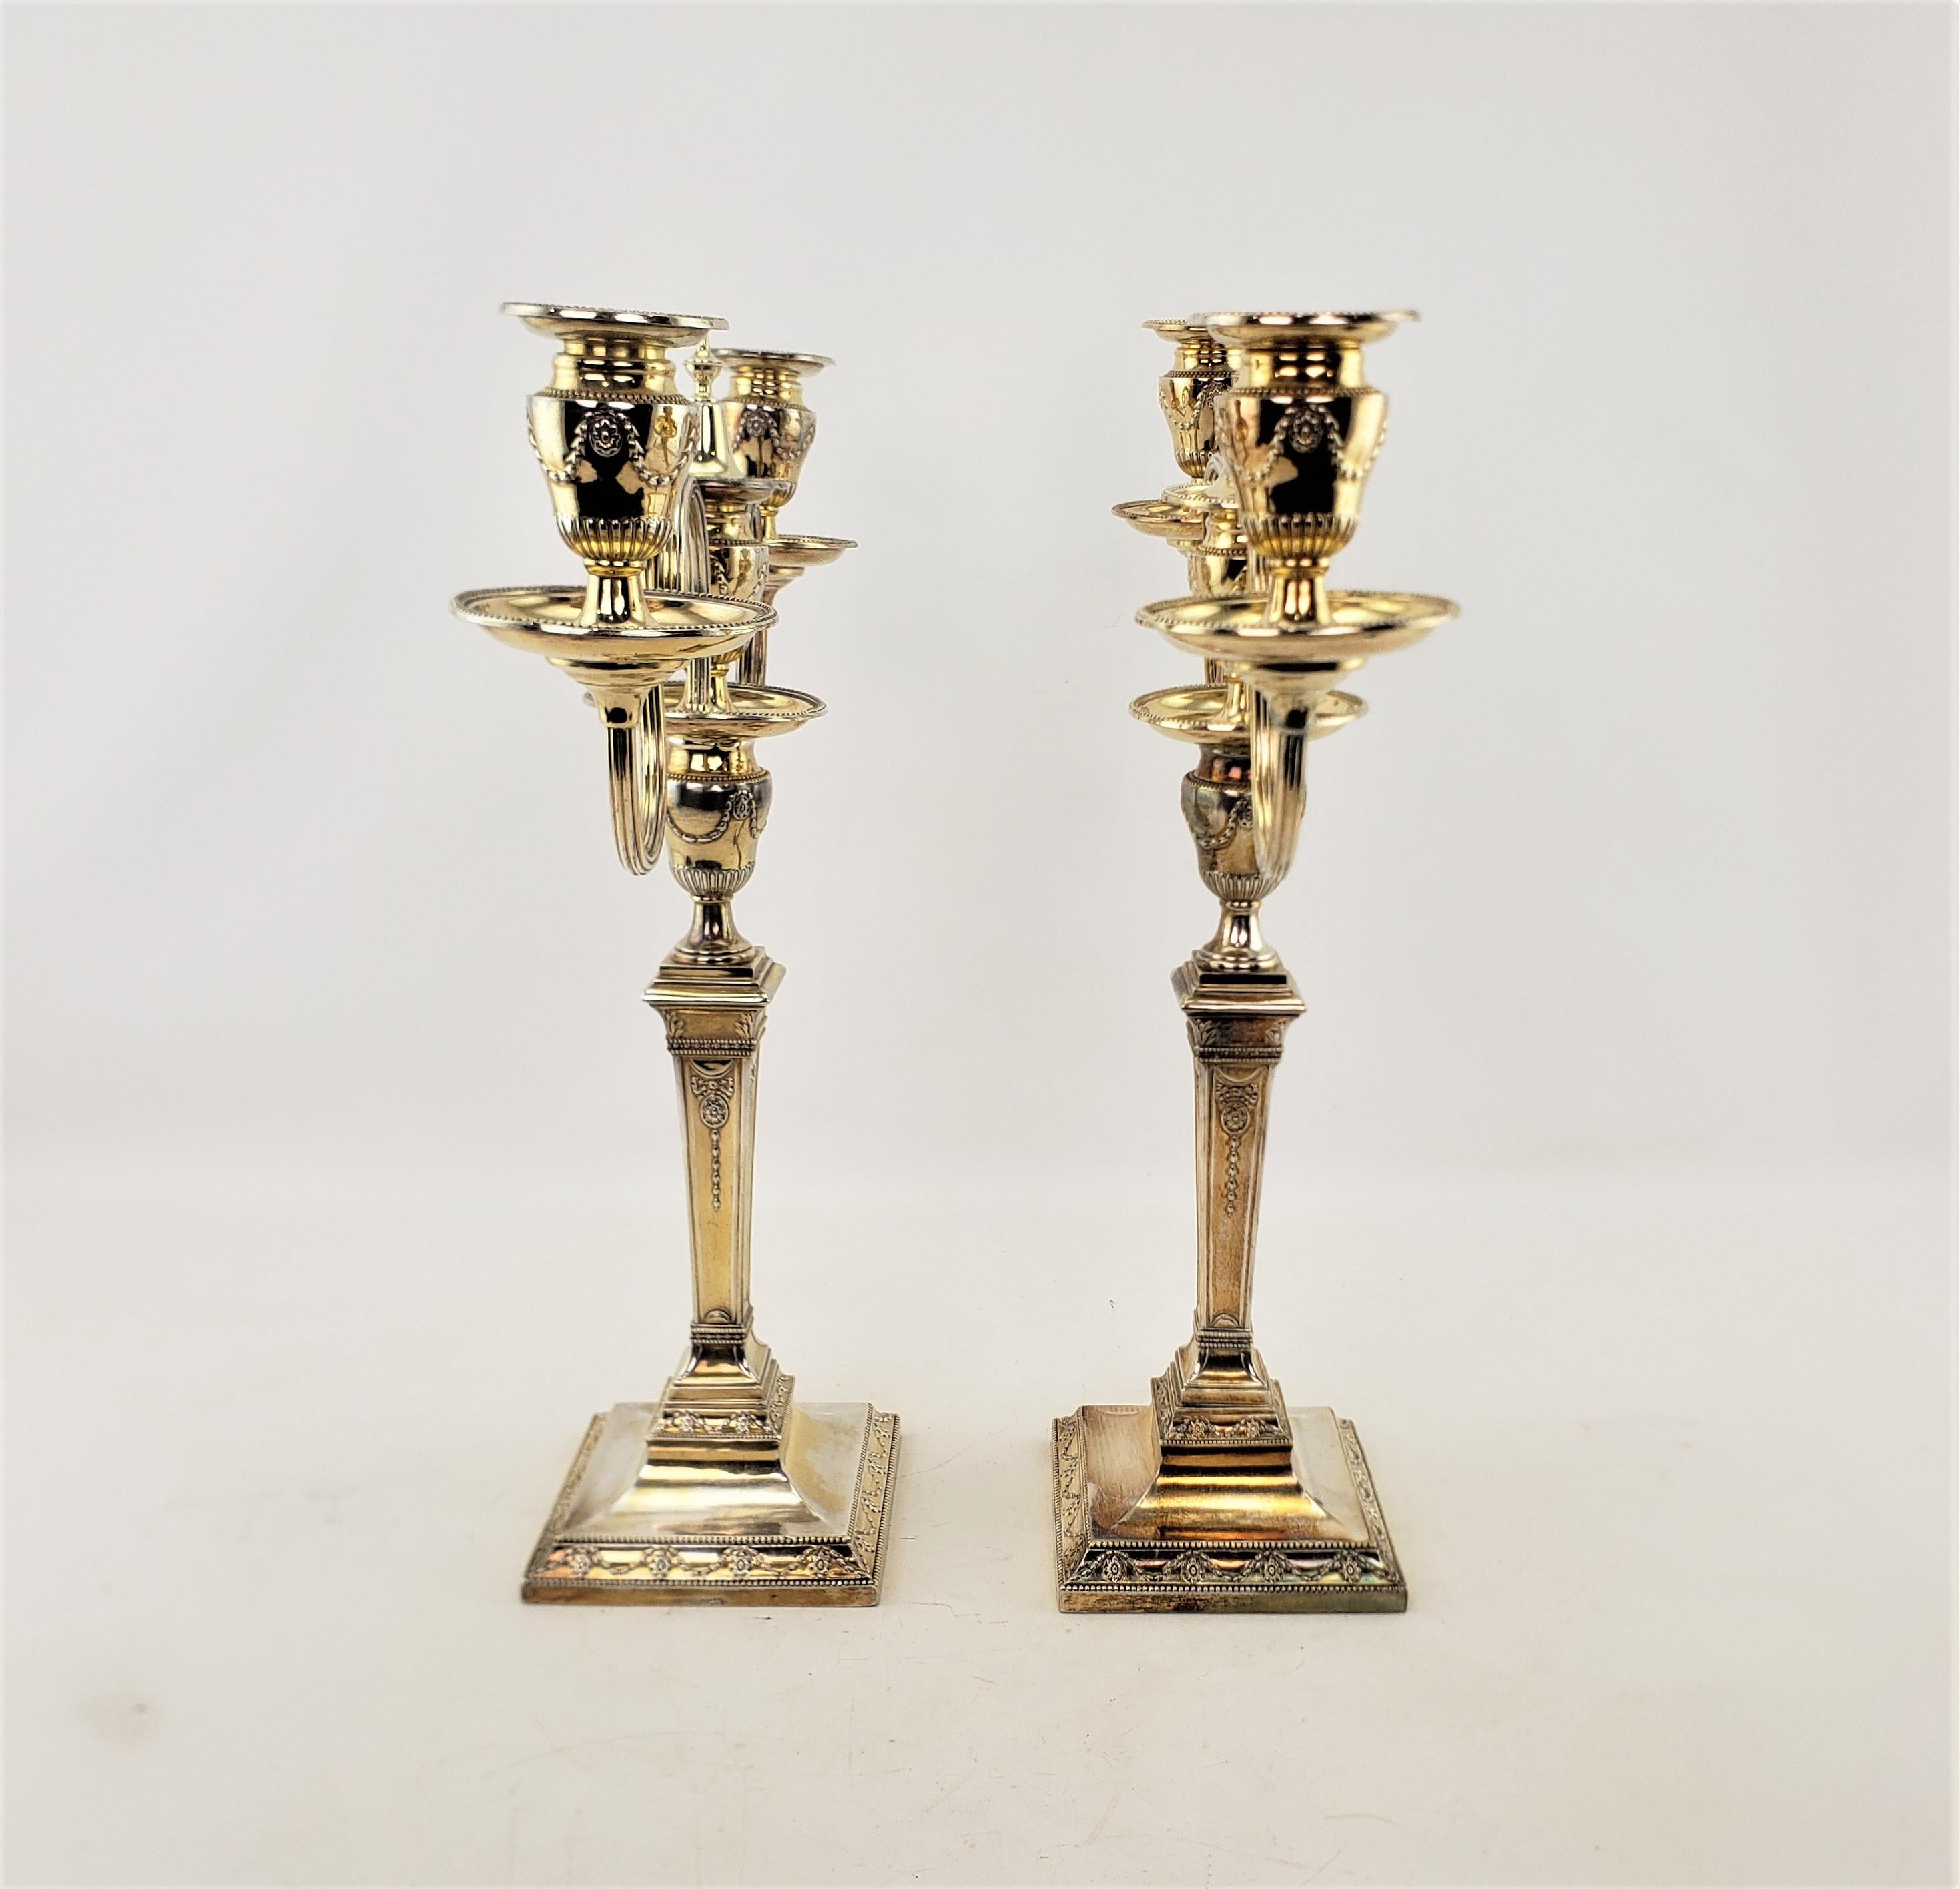 Set of Antique Mappin & Webb Silver Plated & Gilt Washed Convertible Candelabras In Good Condition For Sale In Hamilton, Ontario